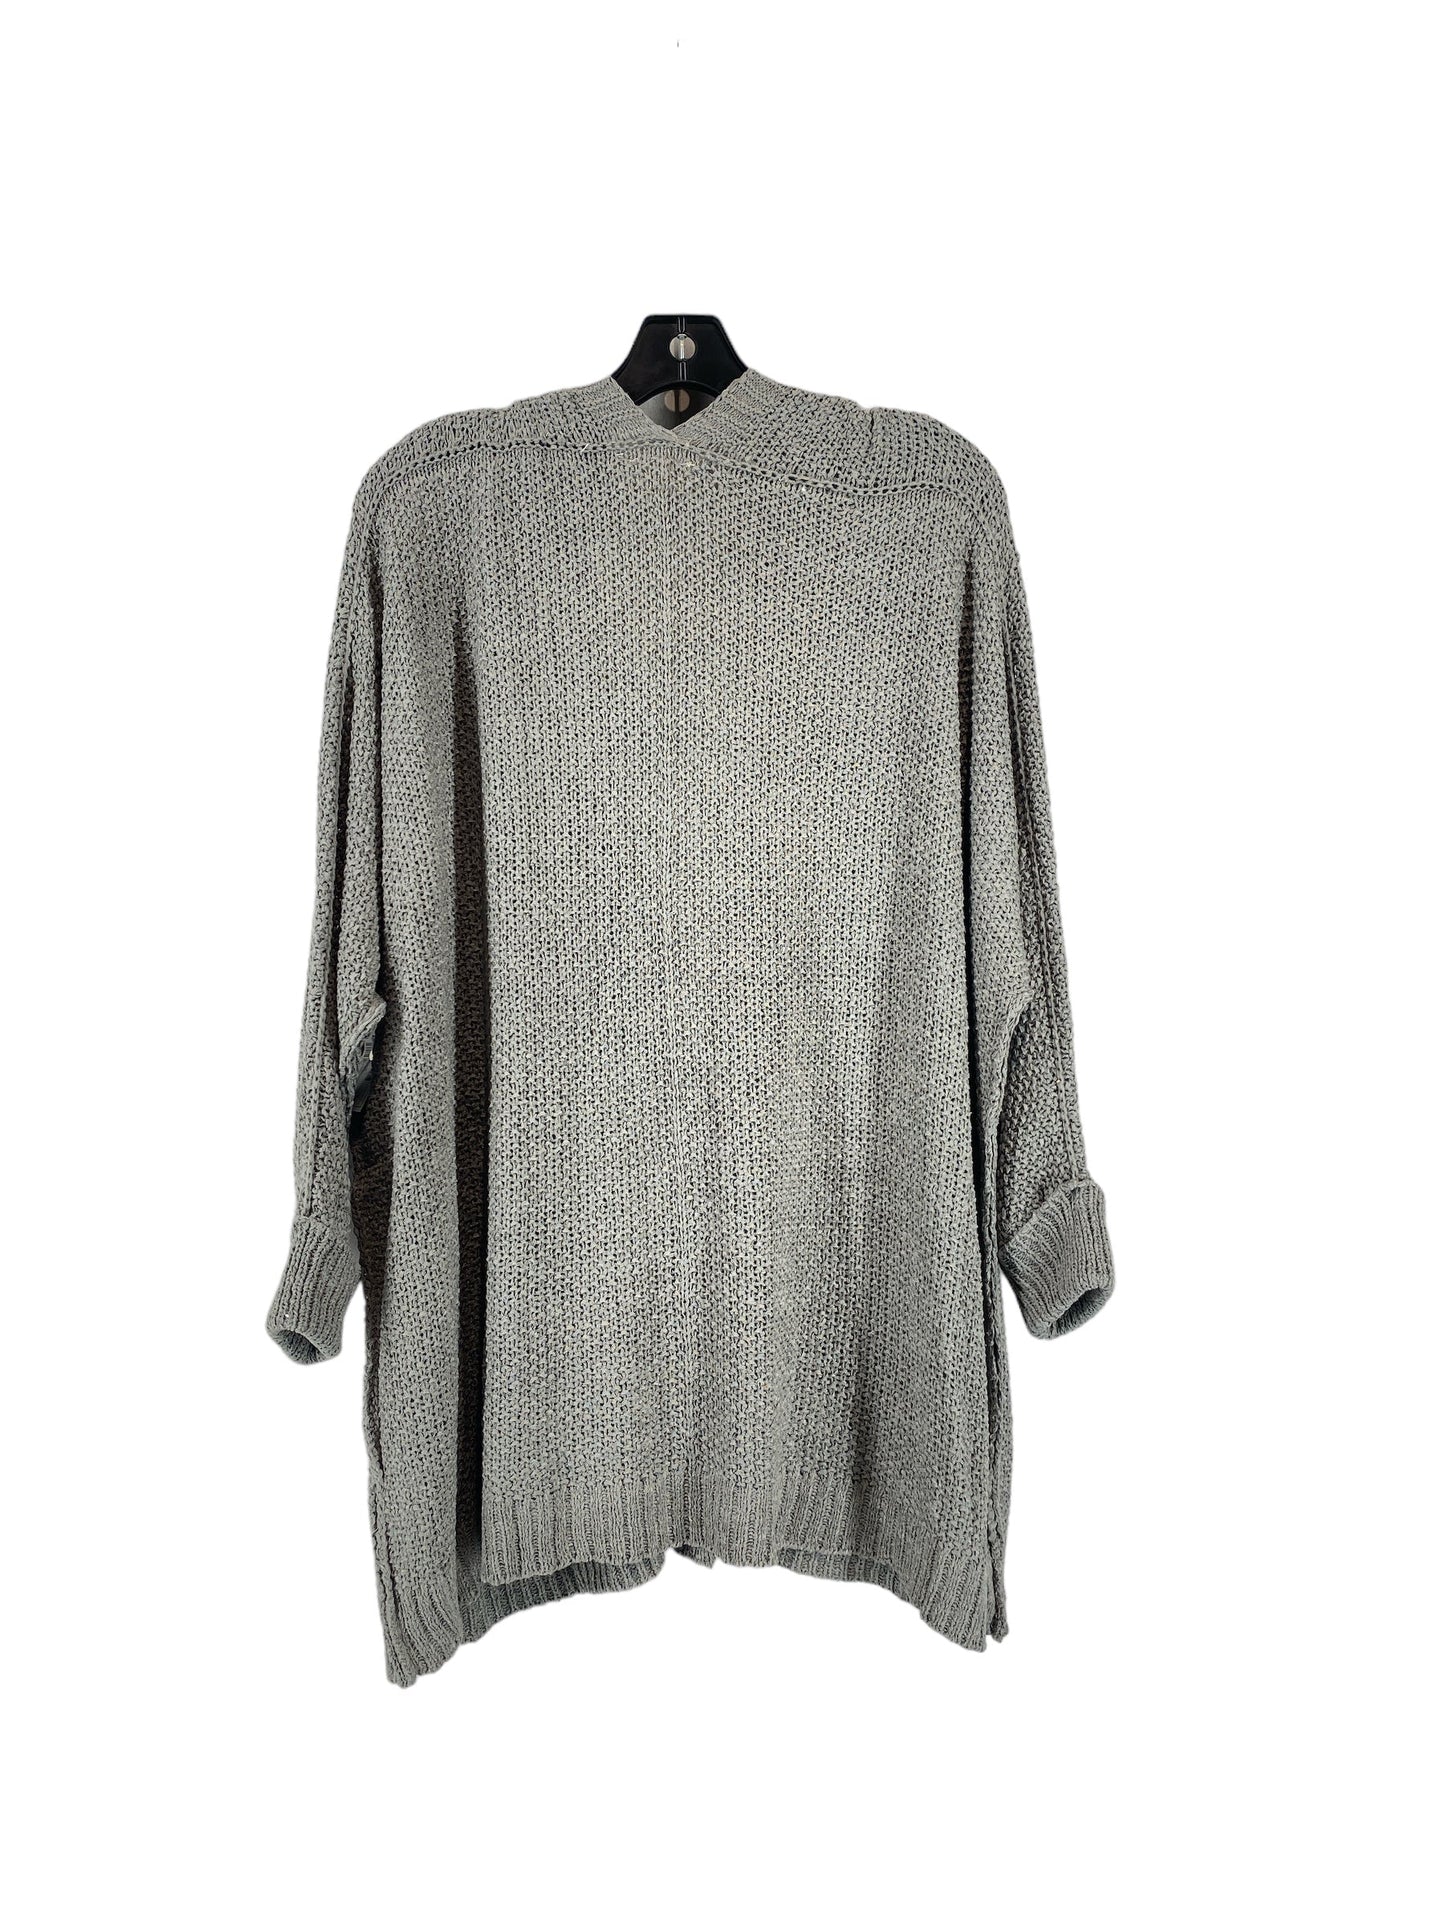 Sweater Cardigan By Ee Some  Size: M